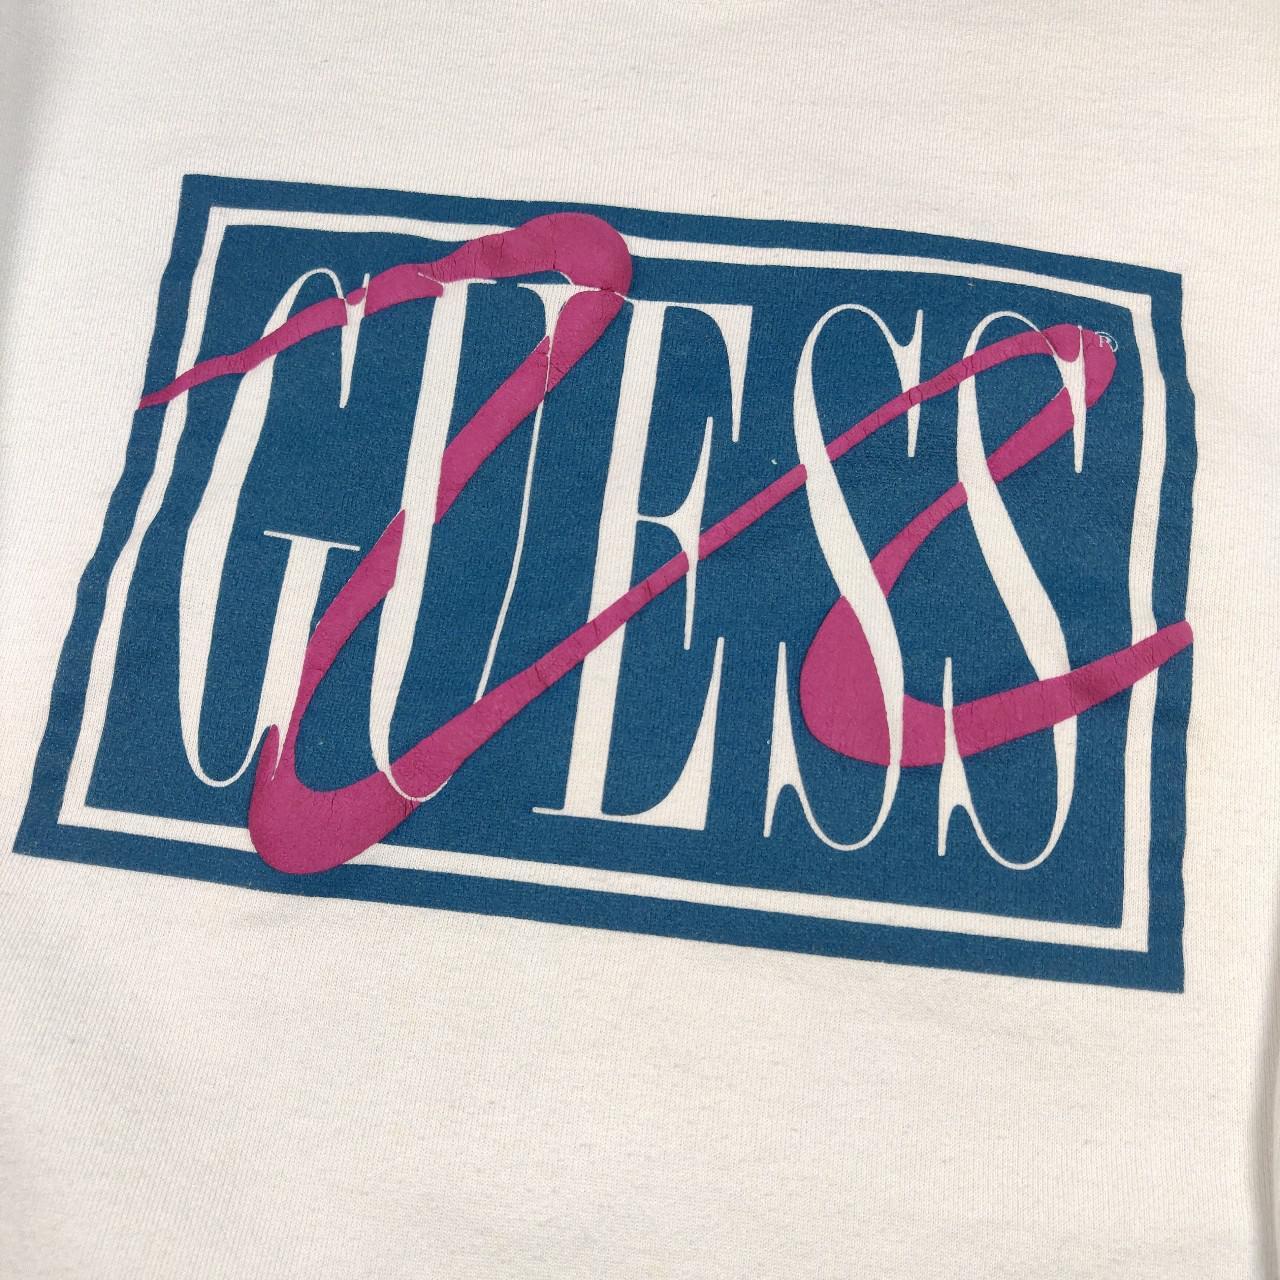 Guess Men's White and Pink Sweatshirt (3)